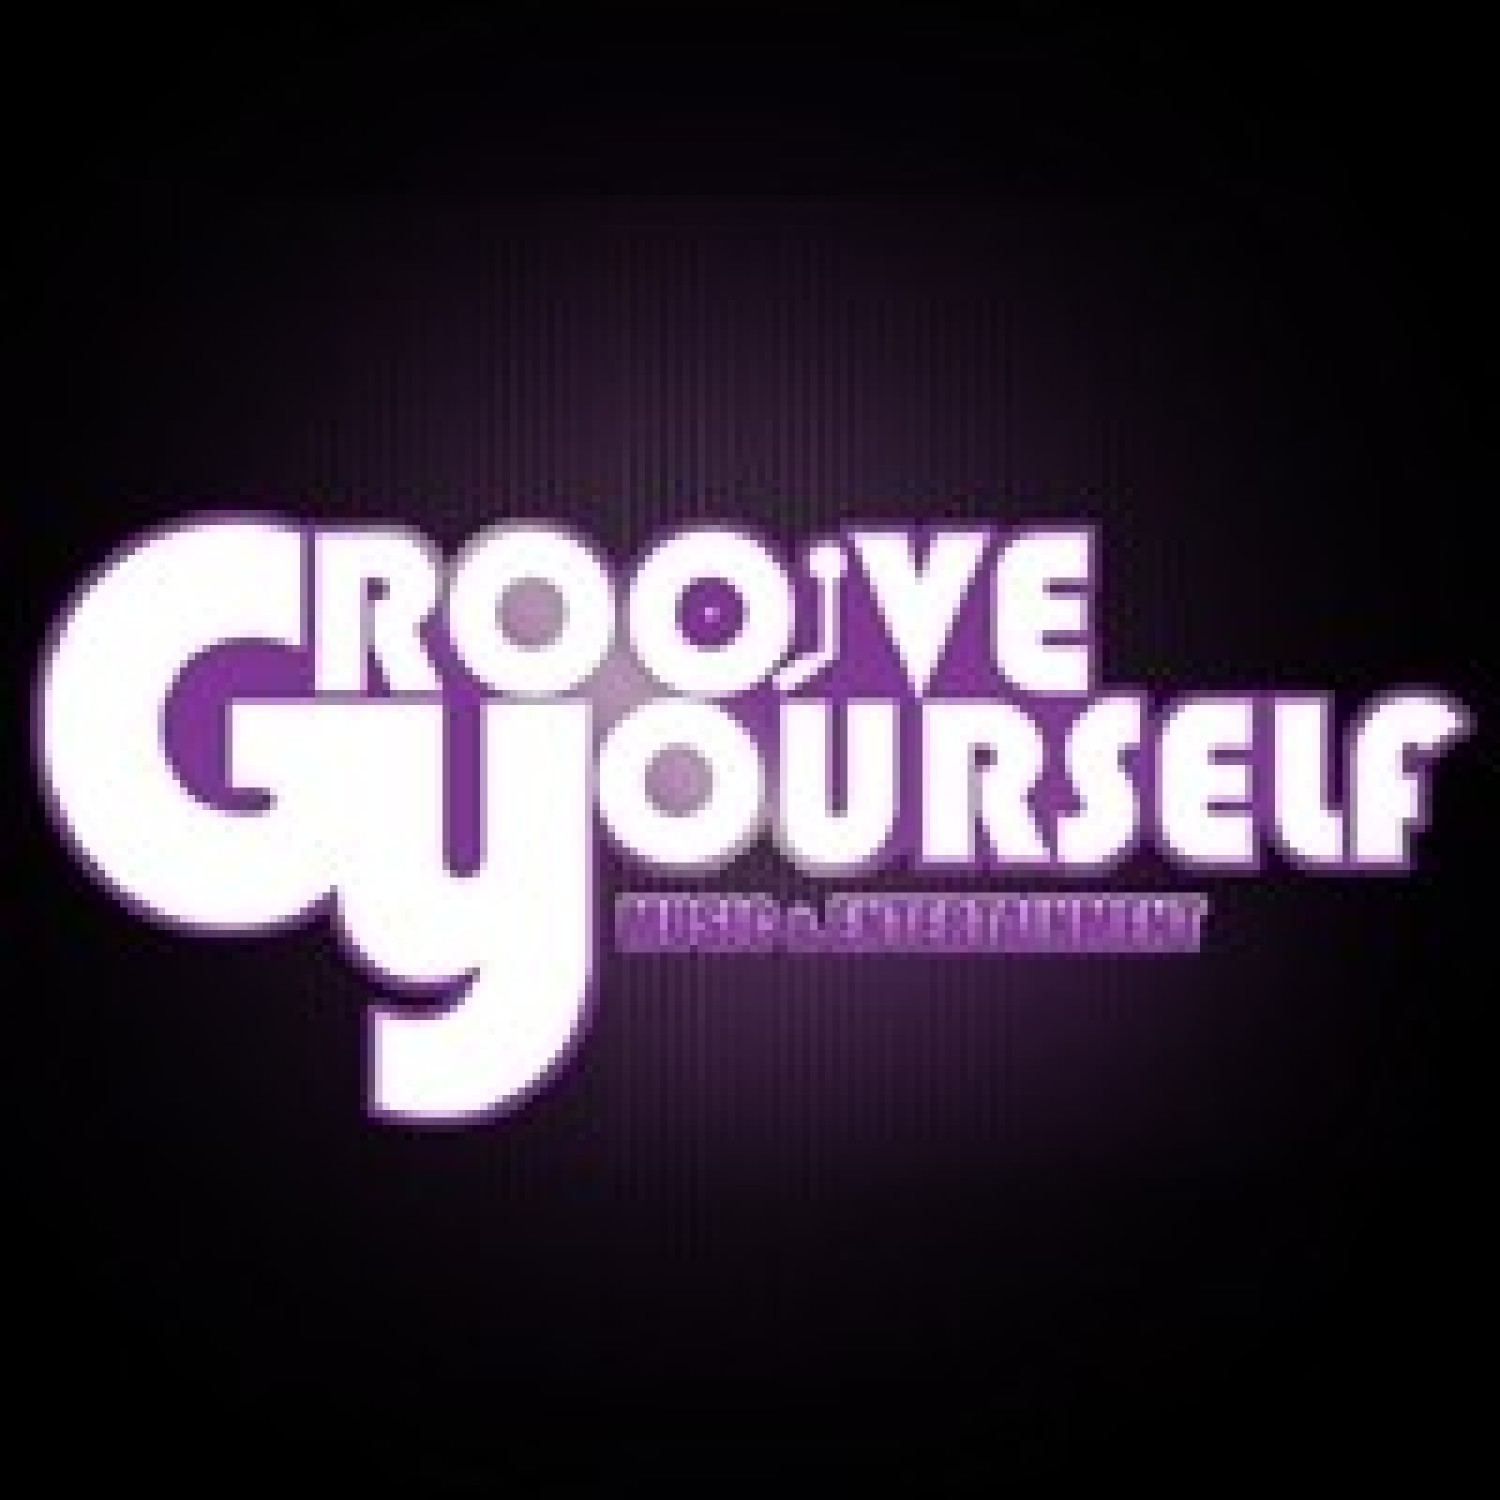 Groove Yourself